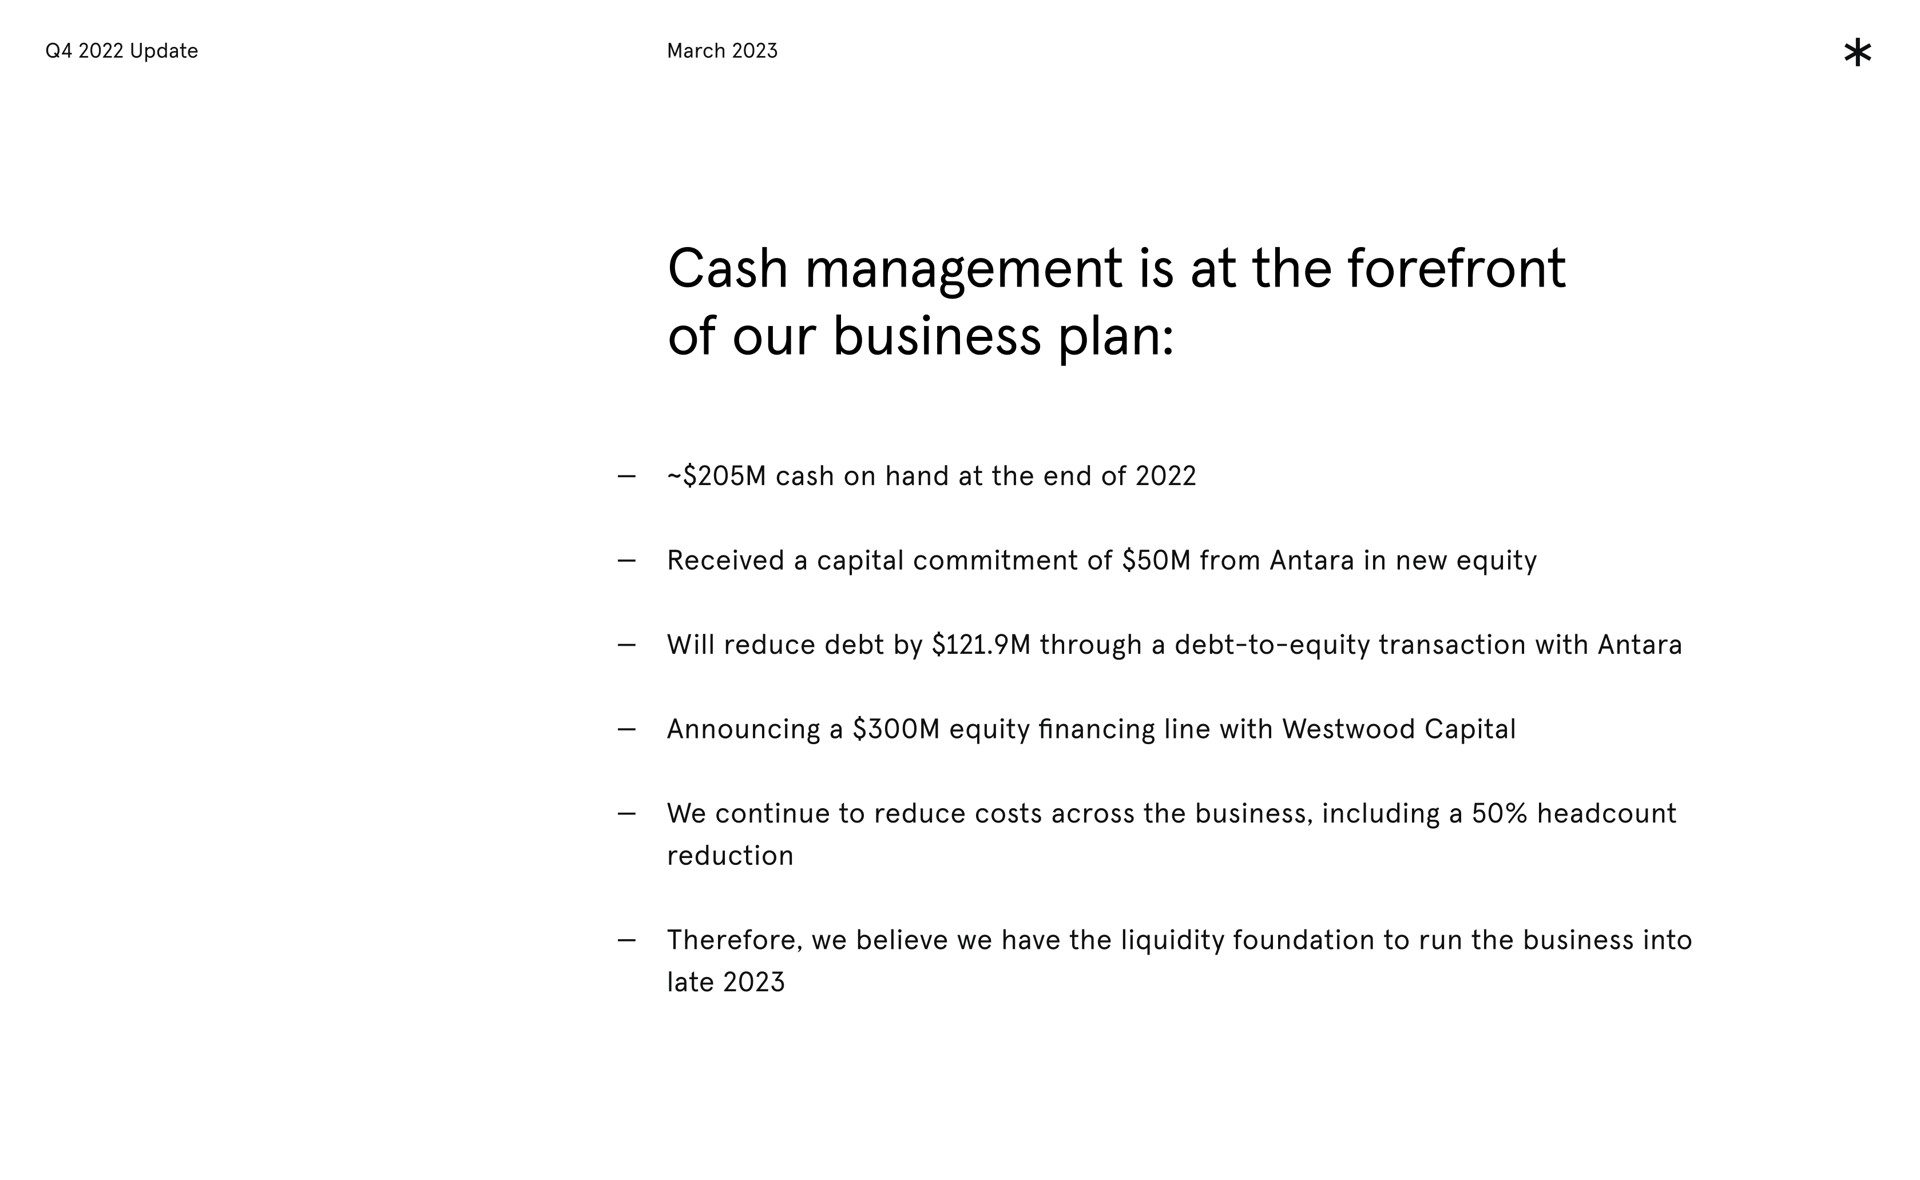 cash management is at the forefront of our business plan cash on hand at the end of received a capital commitment of from in new equity ill reduce debt by through a debt to equity transaction with announcing a equity line with continue to reduce costs across the business including a reduction therefore we believe we have the liquidity foundation to run the business into late will financing | Arrival